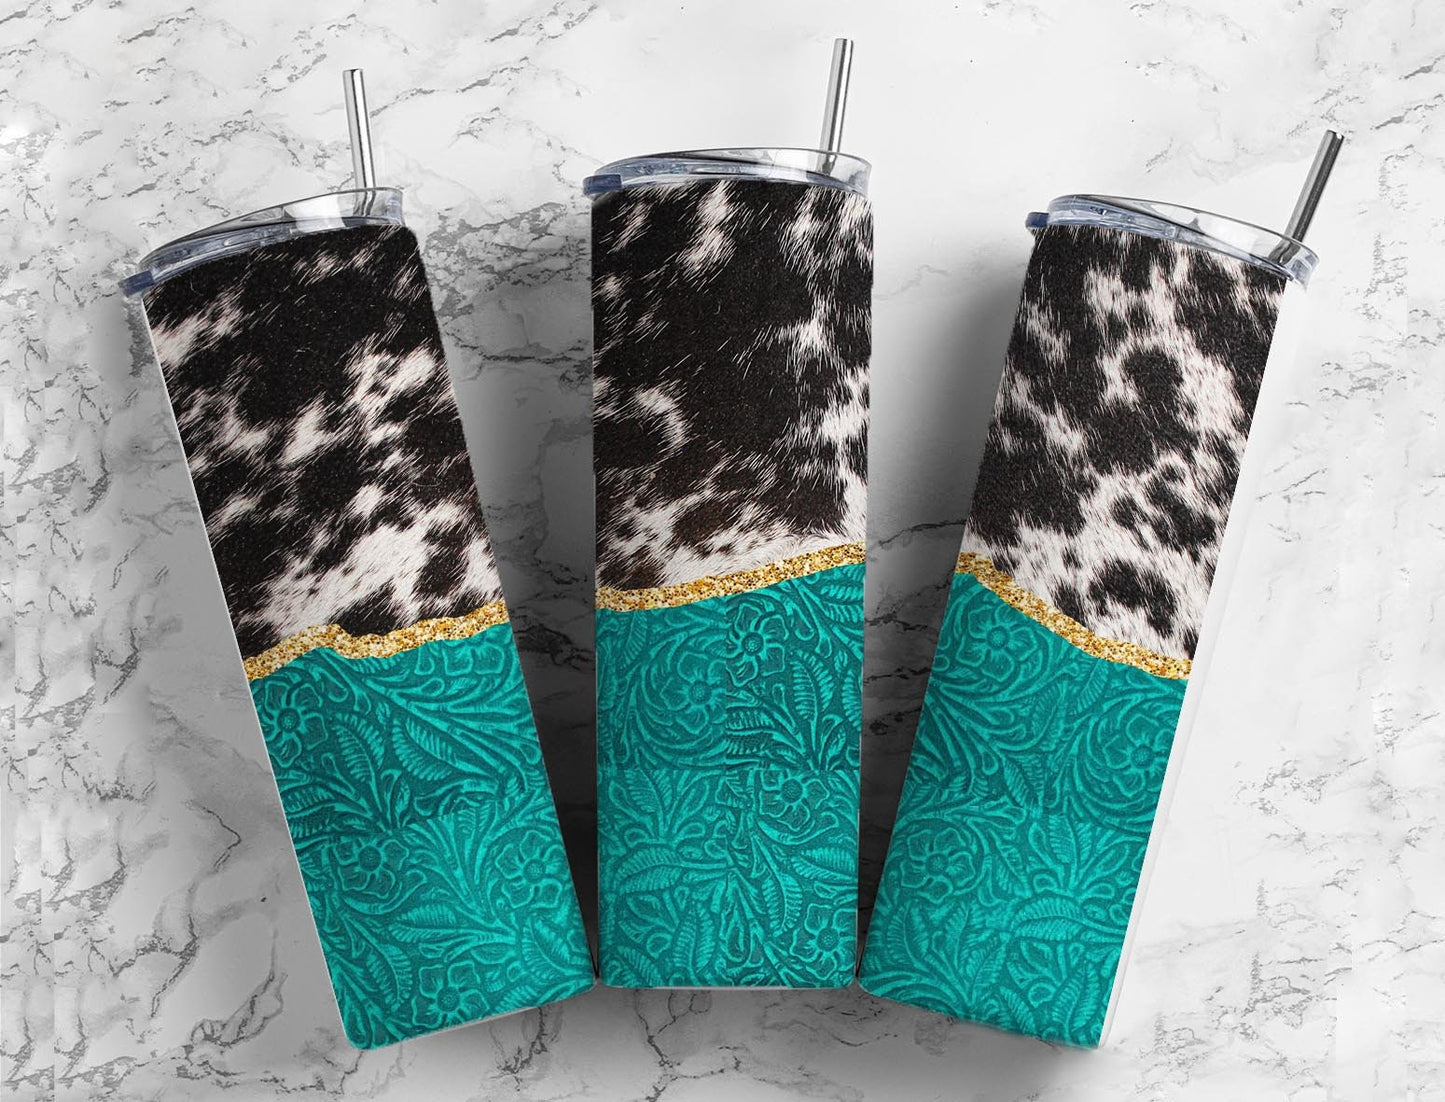 Turquoise Leather Cow 20oz Sublimation Tumbler, Teal Cow Print Straight Skinny Tumbler Wrap, Leather Western